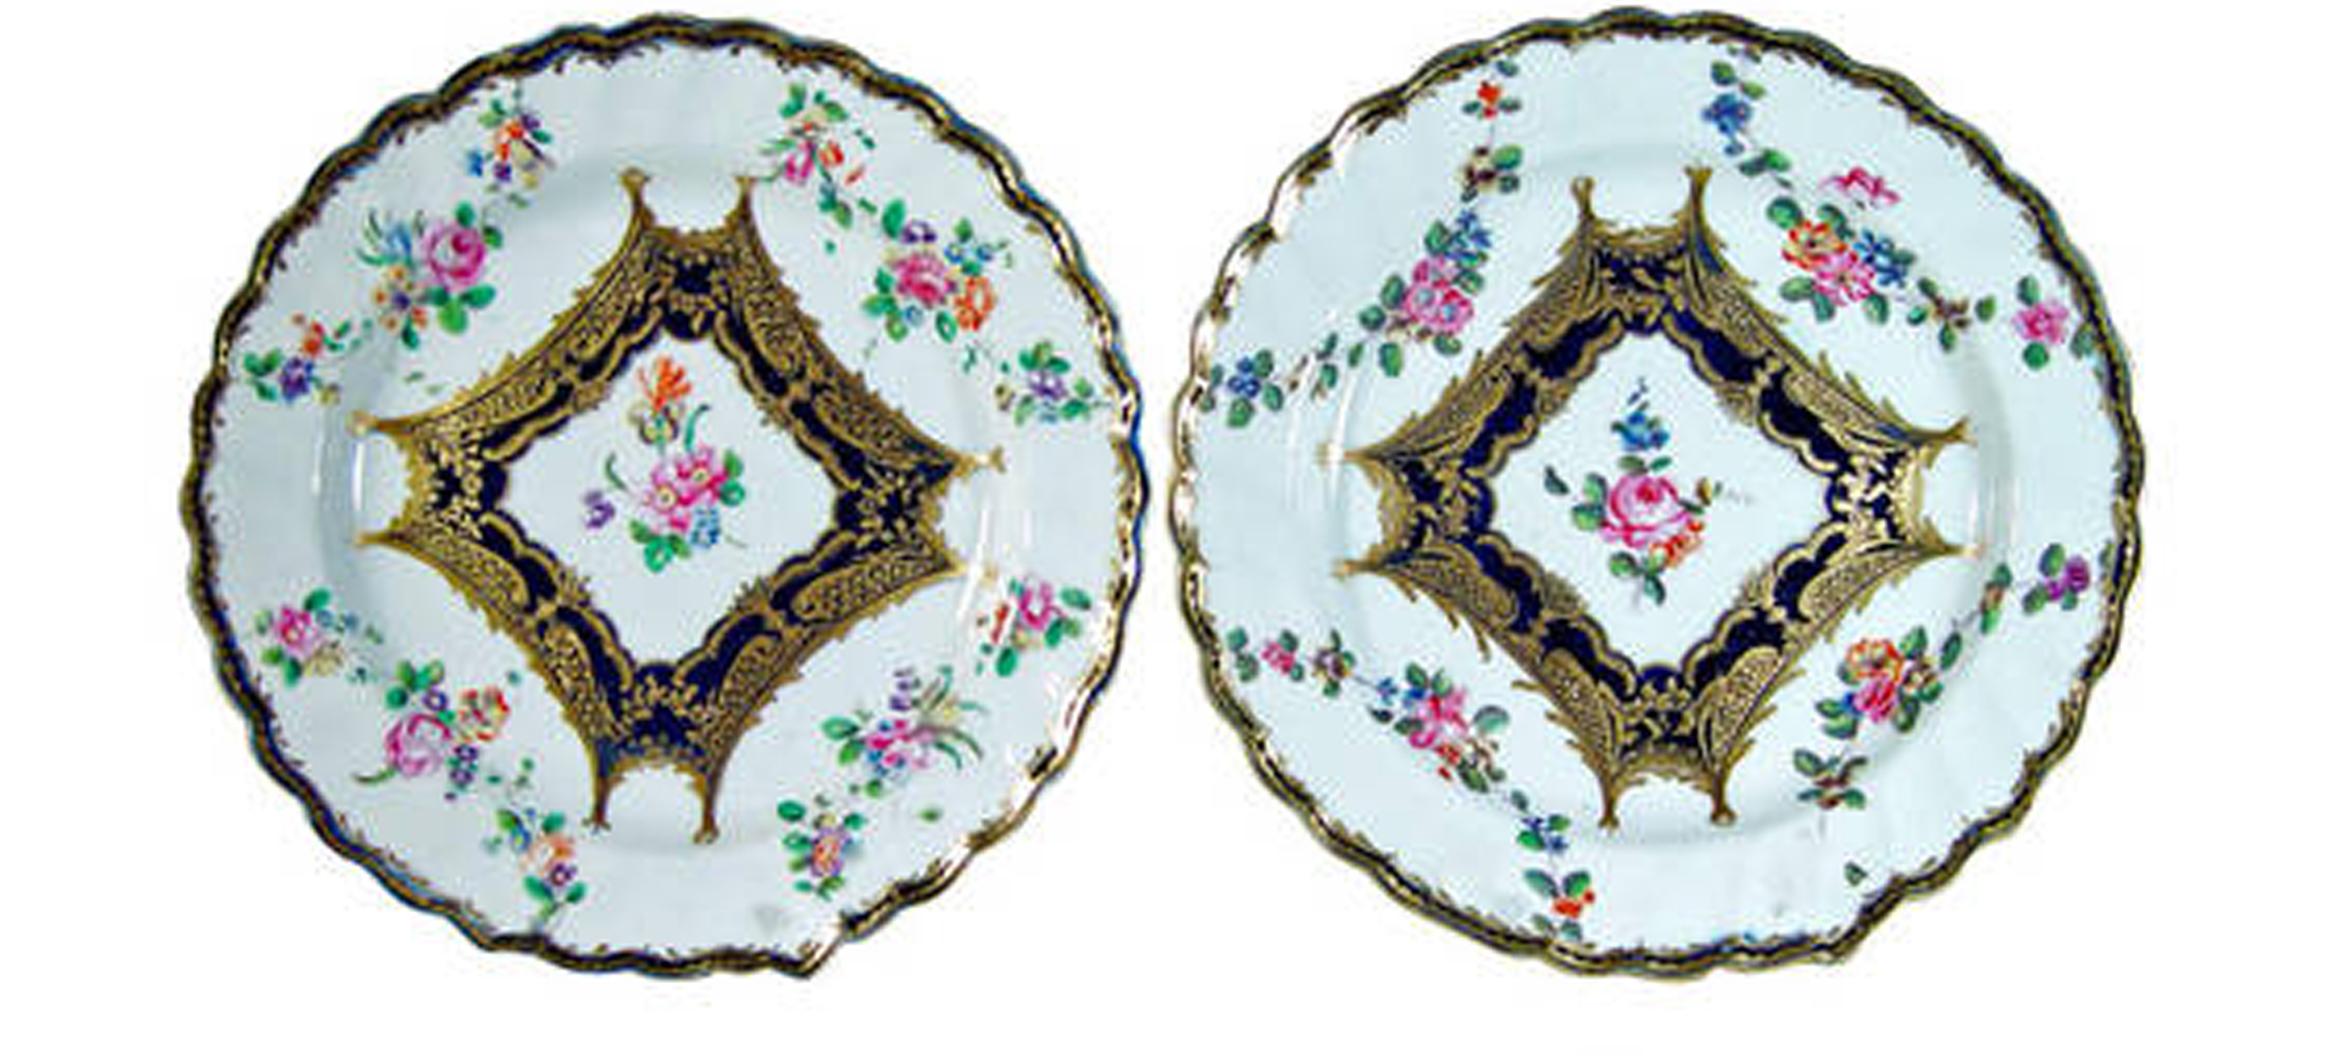 Chelsea Porcelain Set of Six Botanical Dessert Plates, 18th Century In Good Condition For Sale In Downingtown, PA